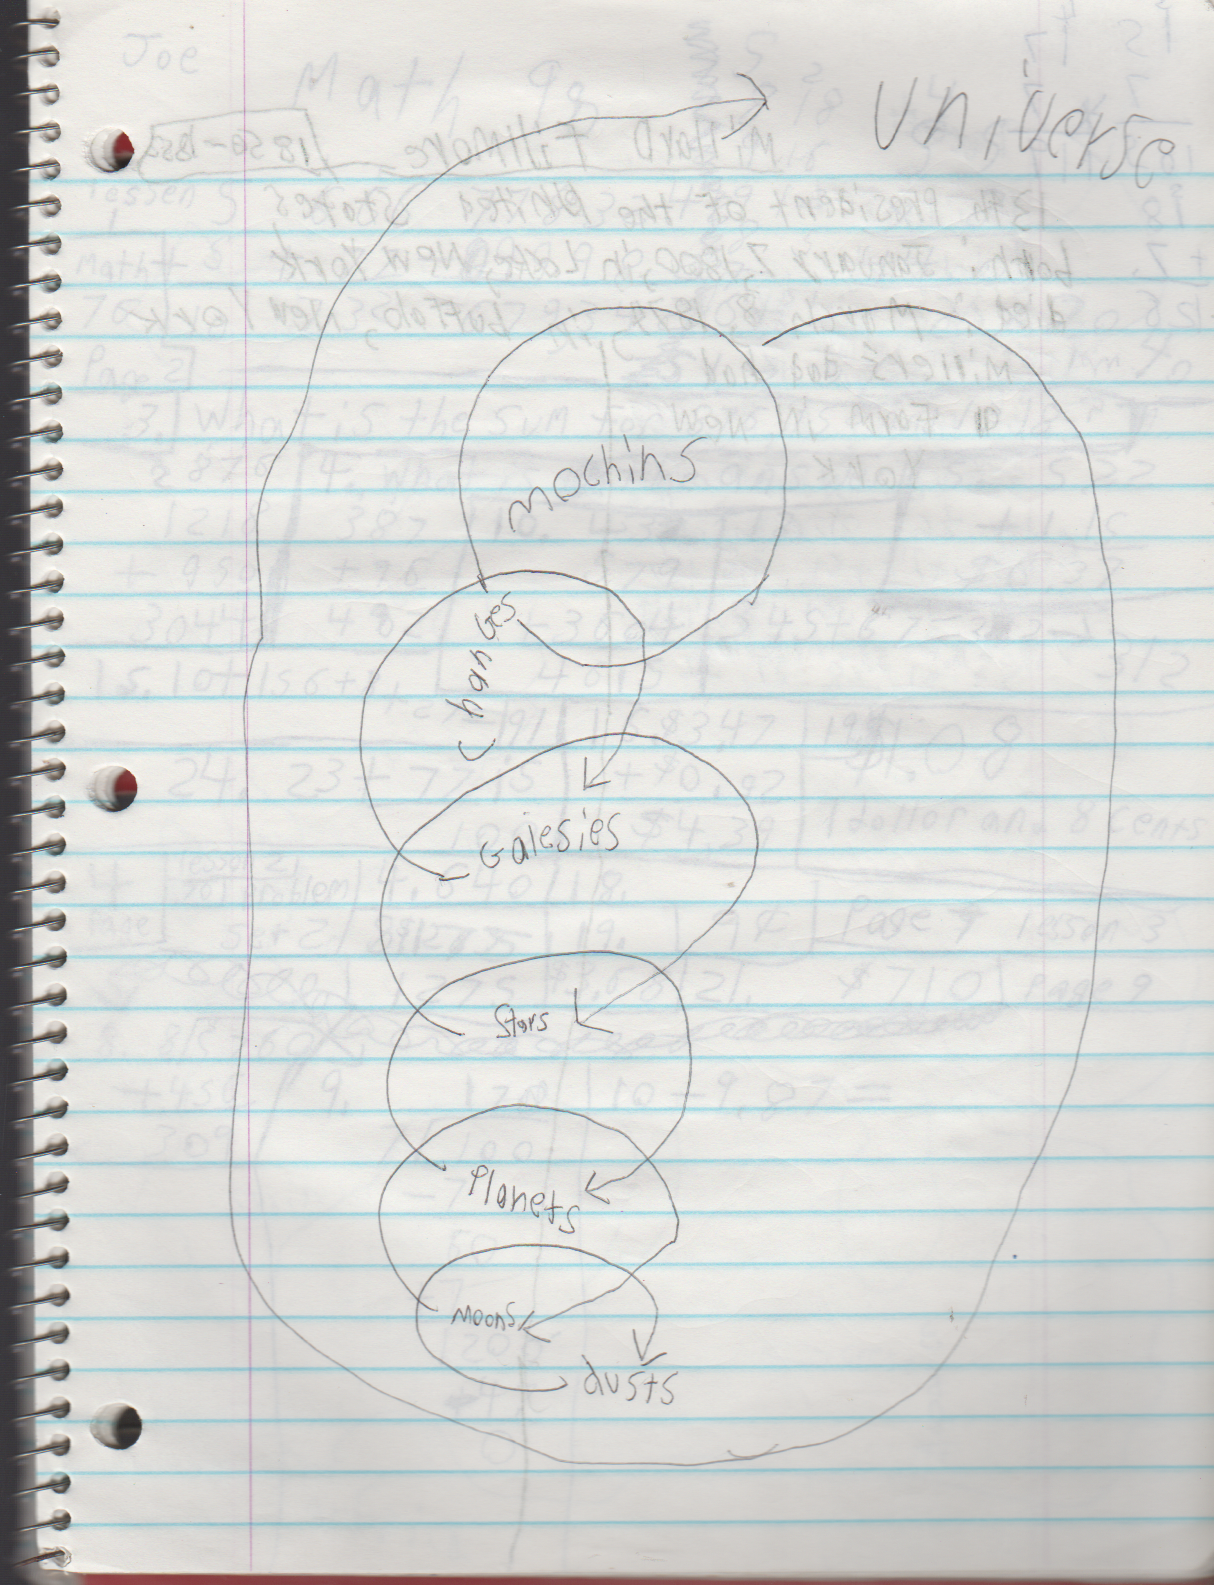 1996-08-18 - Saturday - 11 yr old Joey Arnold's School Book, dates through to 1998 apx, mostly 96, Writings, Drawings, Etc-031.png